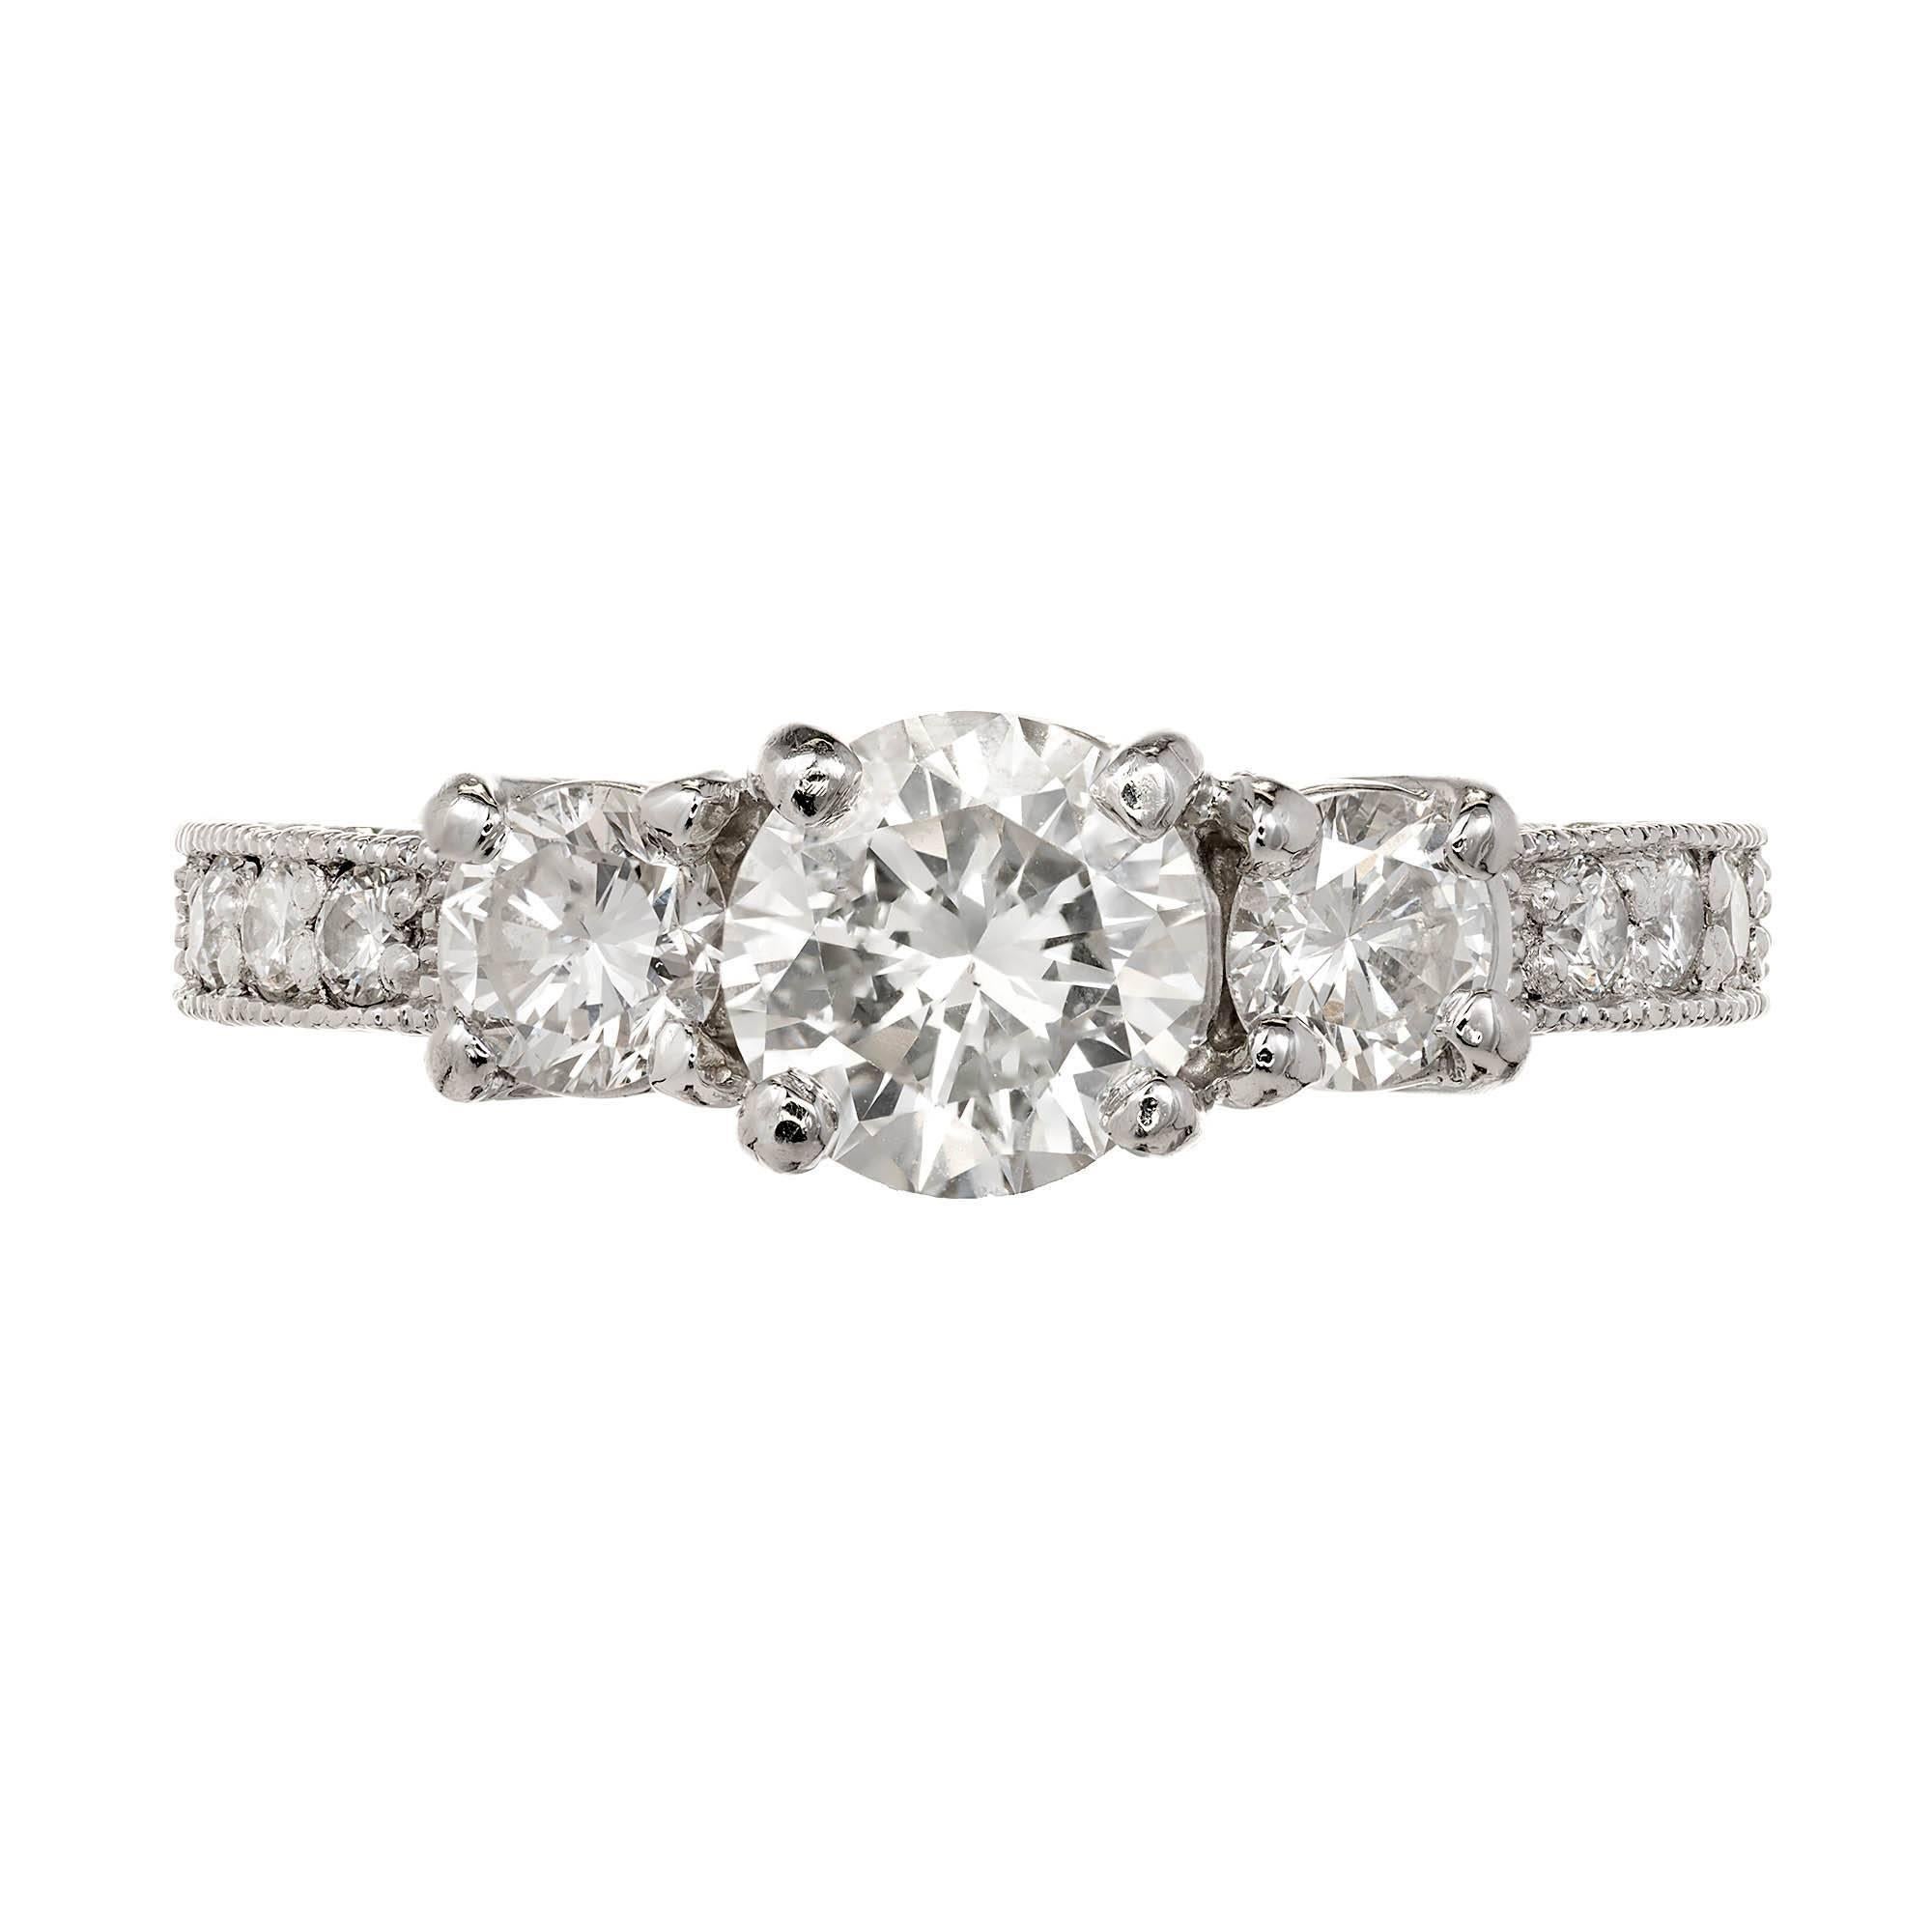 Peter Suchy vintage style custom made three-stone diamond platinum engagement ring.  GIA certified 1.00 carat sparkly center diamond flanked by two equally bright side diamonds in a curved prong top. The shoulders are mil-grained and set with full